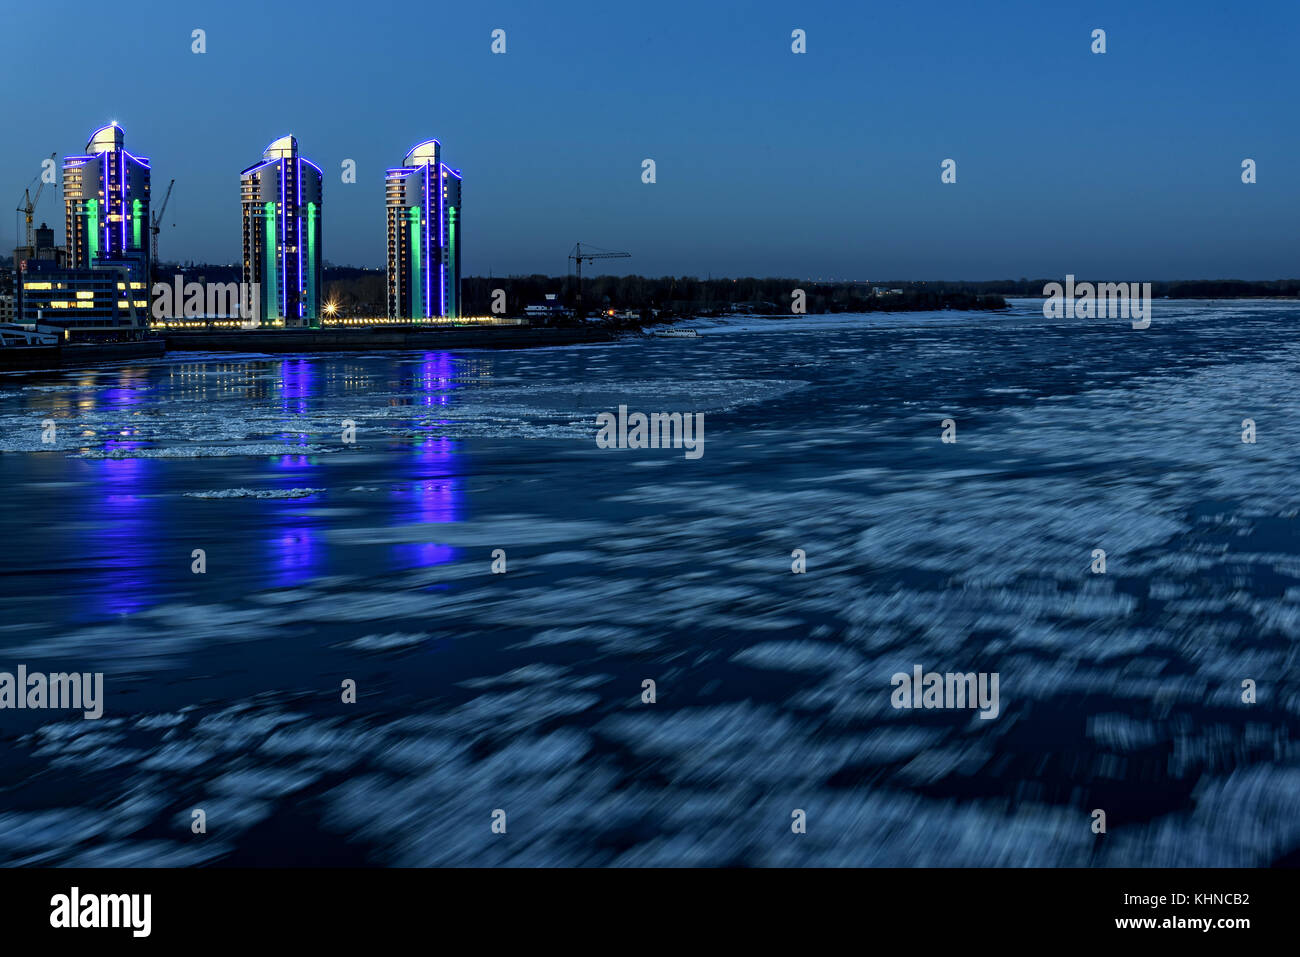 The picturesque night view of the city with lights and river with the reflections of lights in the water and moving ice, shot on a long exposure Stock Photo